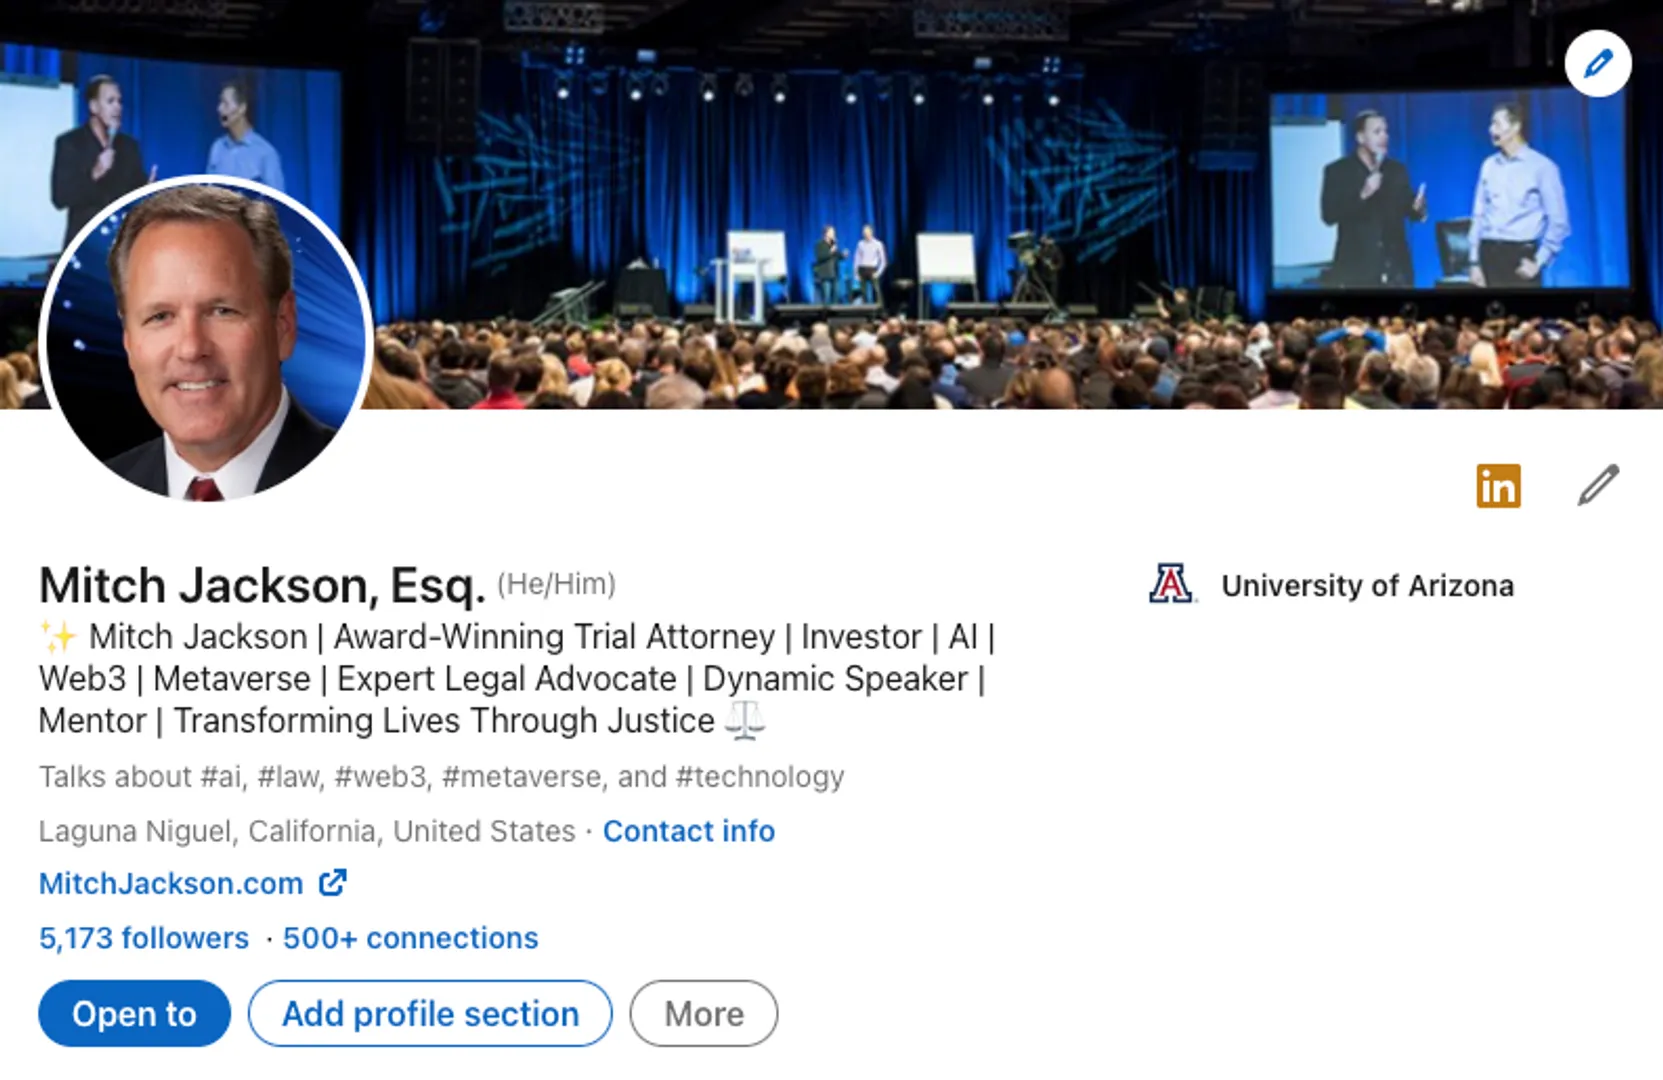 Don't miss out on the latest insights and trends in business, law, web3, AI, and the metaverse. In addition to leveraging Entre, let's also continue the conversation over on LinkedIn!  https://linkedIn.com/in/mitchjackson